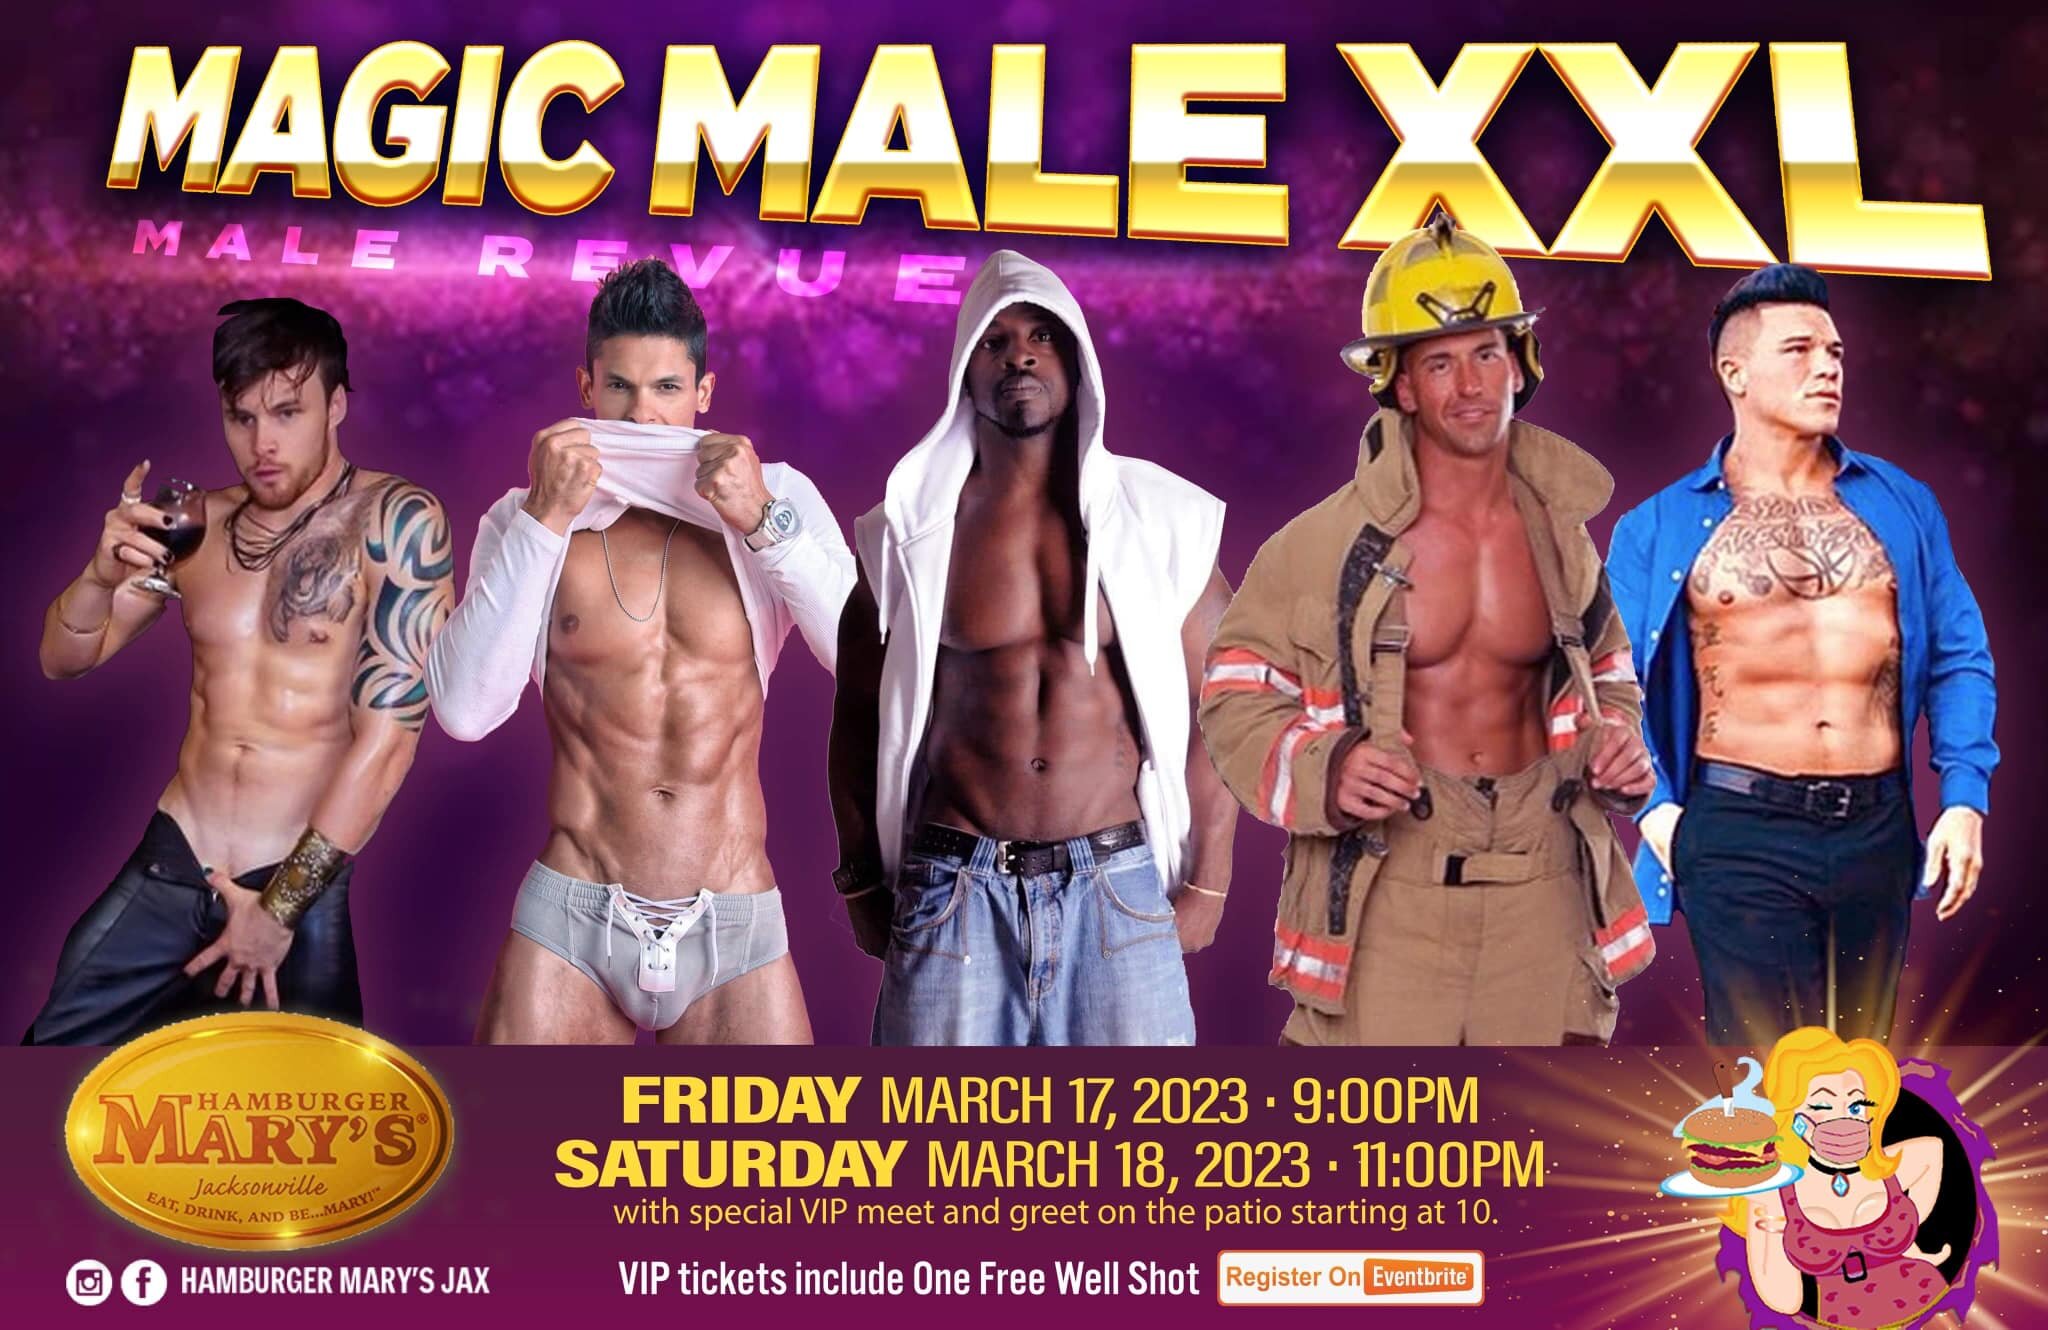 These events will sell out! Don't wait, Buy now! 🔥🔥

VIP Ticket includes one free well shot! 🥃 

🎟️ Friday, March 17th Show @ 9pm - https://hamburgermarysmagicmale.eventbrite.com

🎟️ Saturday, March 18th Show @ 11pm -https://Hamburgermarysmagicm